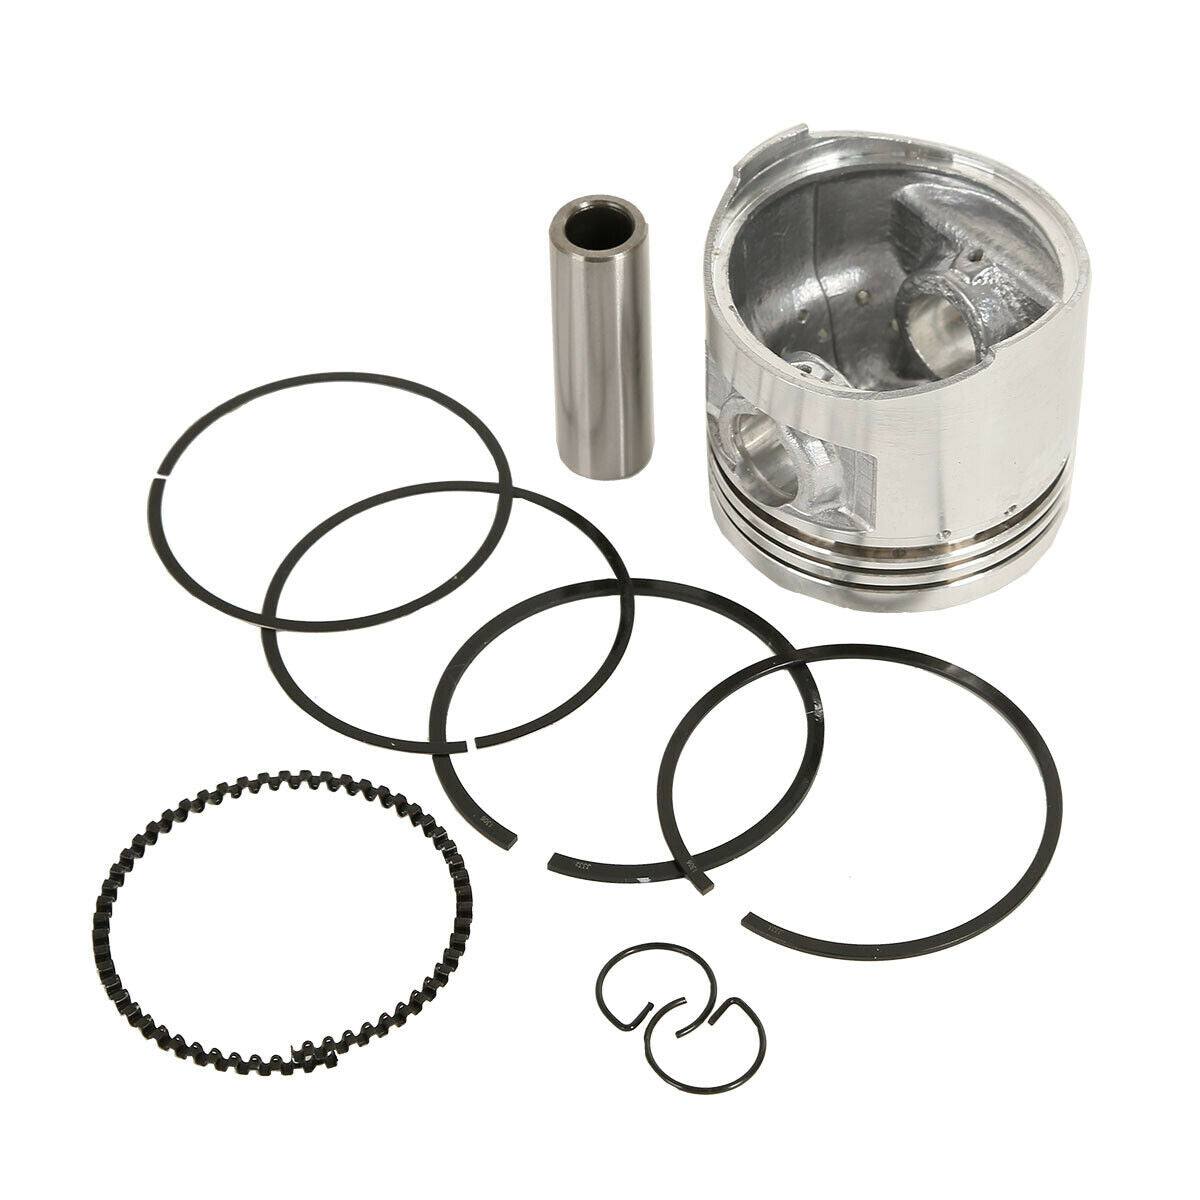 🔥 Cylinder Piston Rings Gasket Rebuild Kit Fit For Honda CB125S CL125S XL SL125 - Moto Life Products